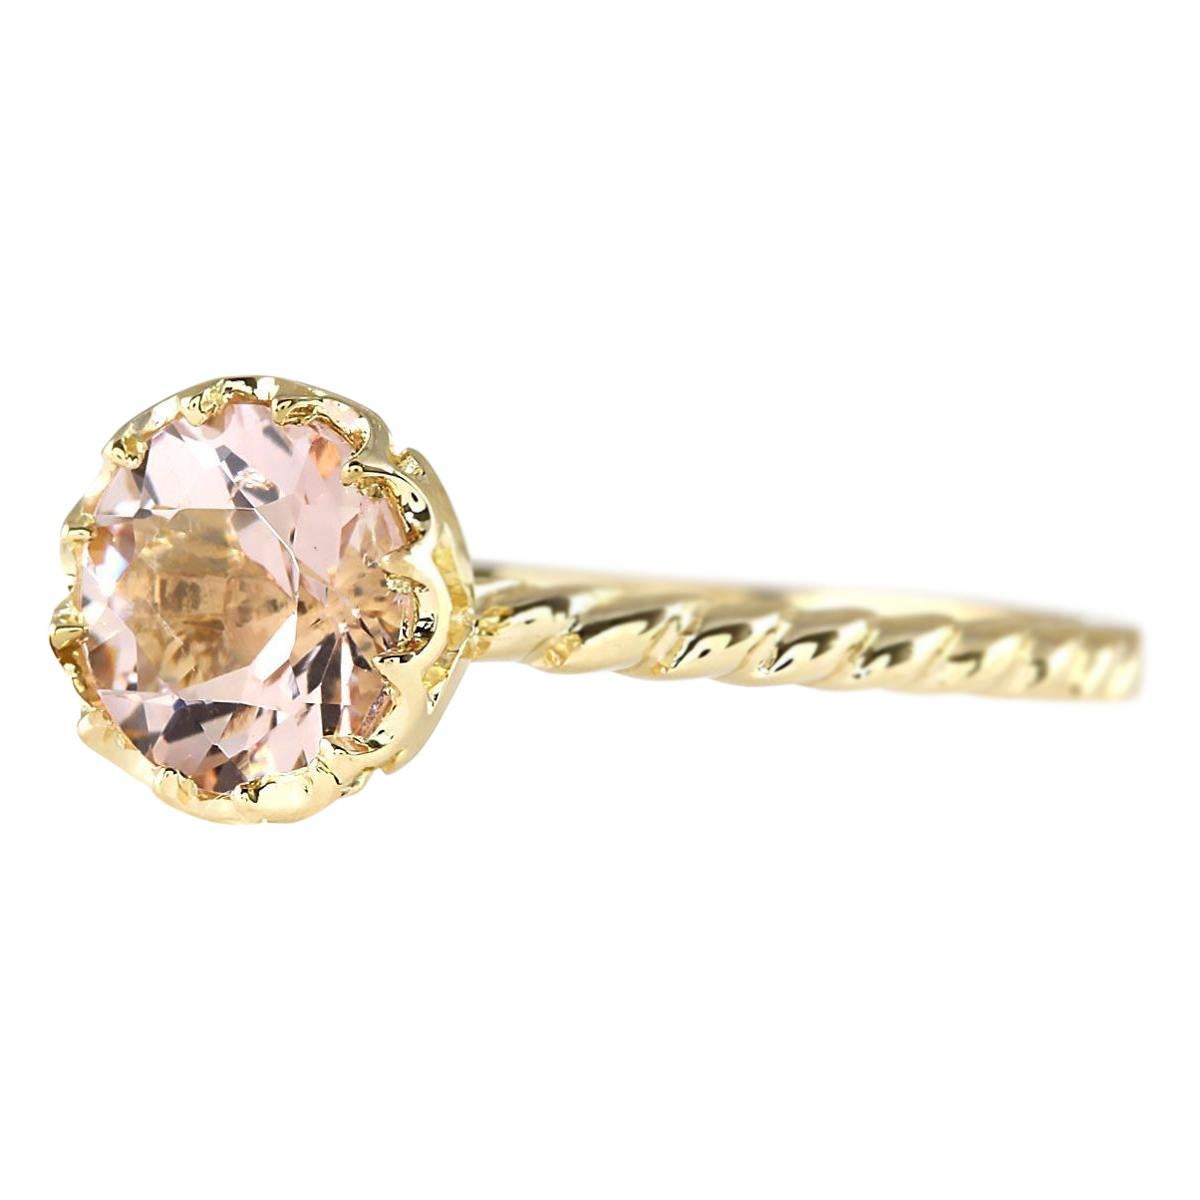 Stamped: 14K Yellow Gold
Total Ring Weight: 1.0 Grams
Total Natural Morganite Weight is 1.20 Carat
Color: Peach
Face Measures: 8.00x8.00 mm
Sku: [703241W]